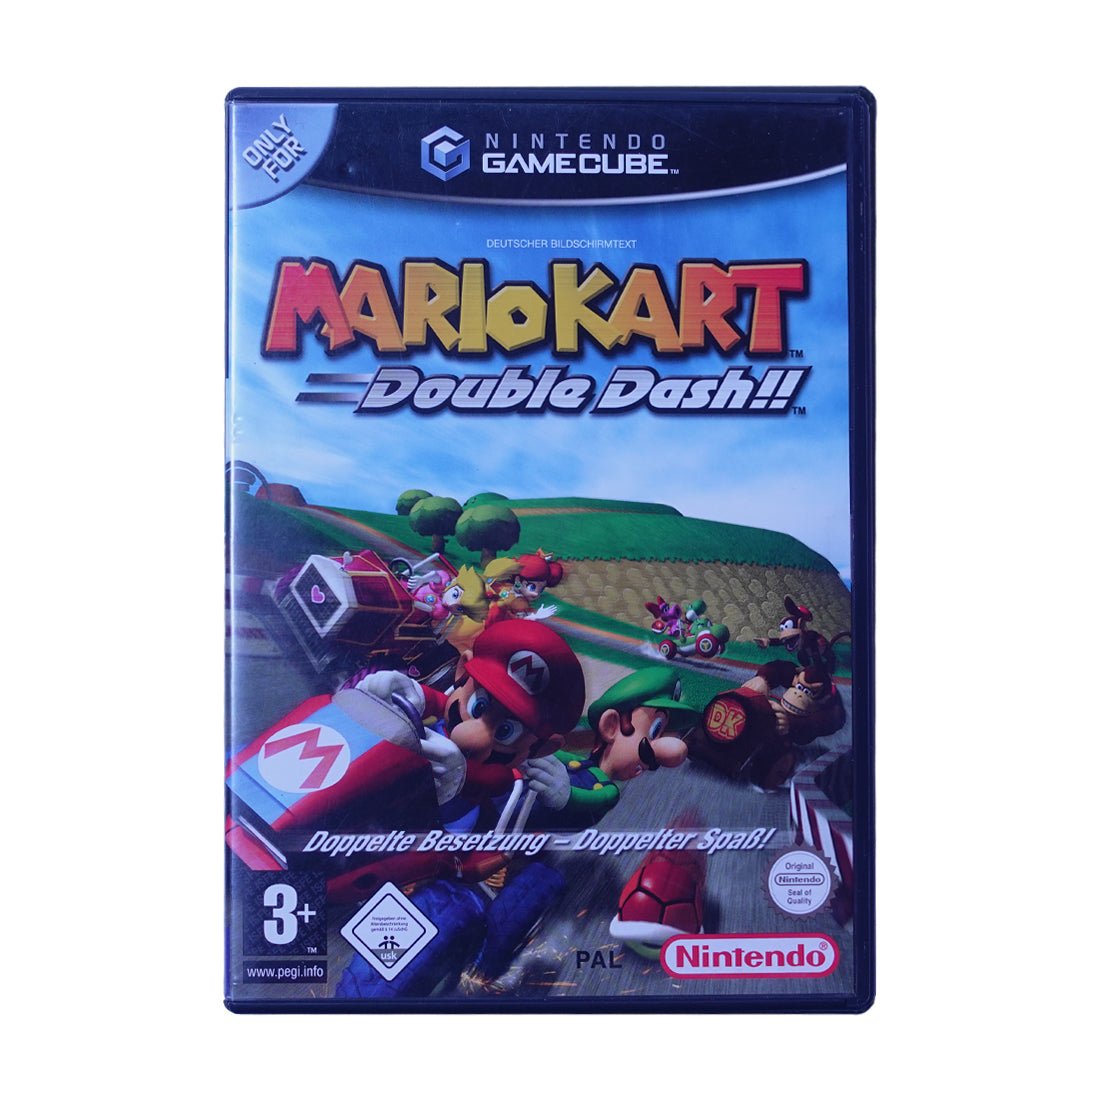 (Pre-Owned) Mario Kart Double Dach - GameCube - ريترو - Store 974 | ستور ٩٧٤